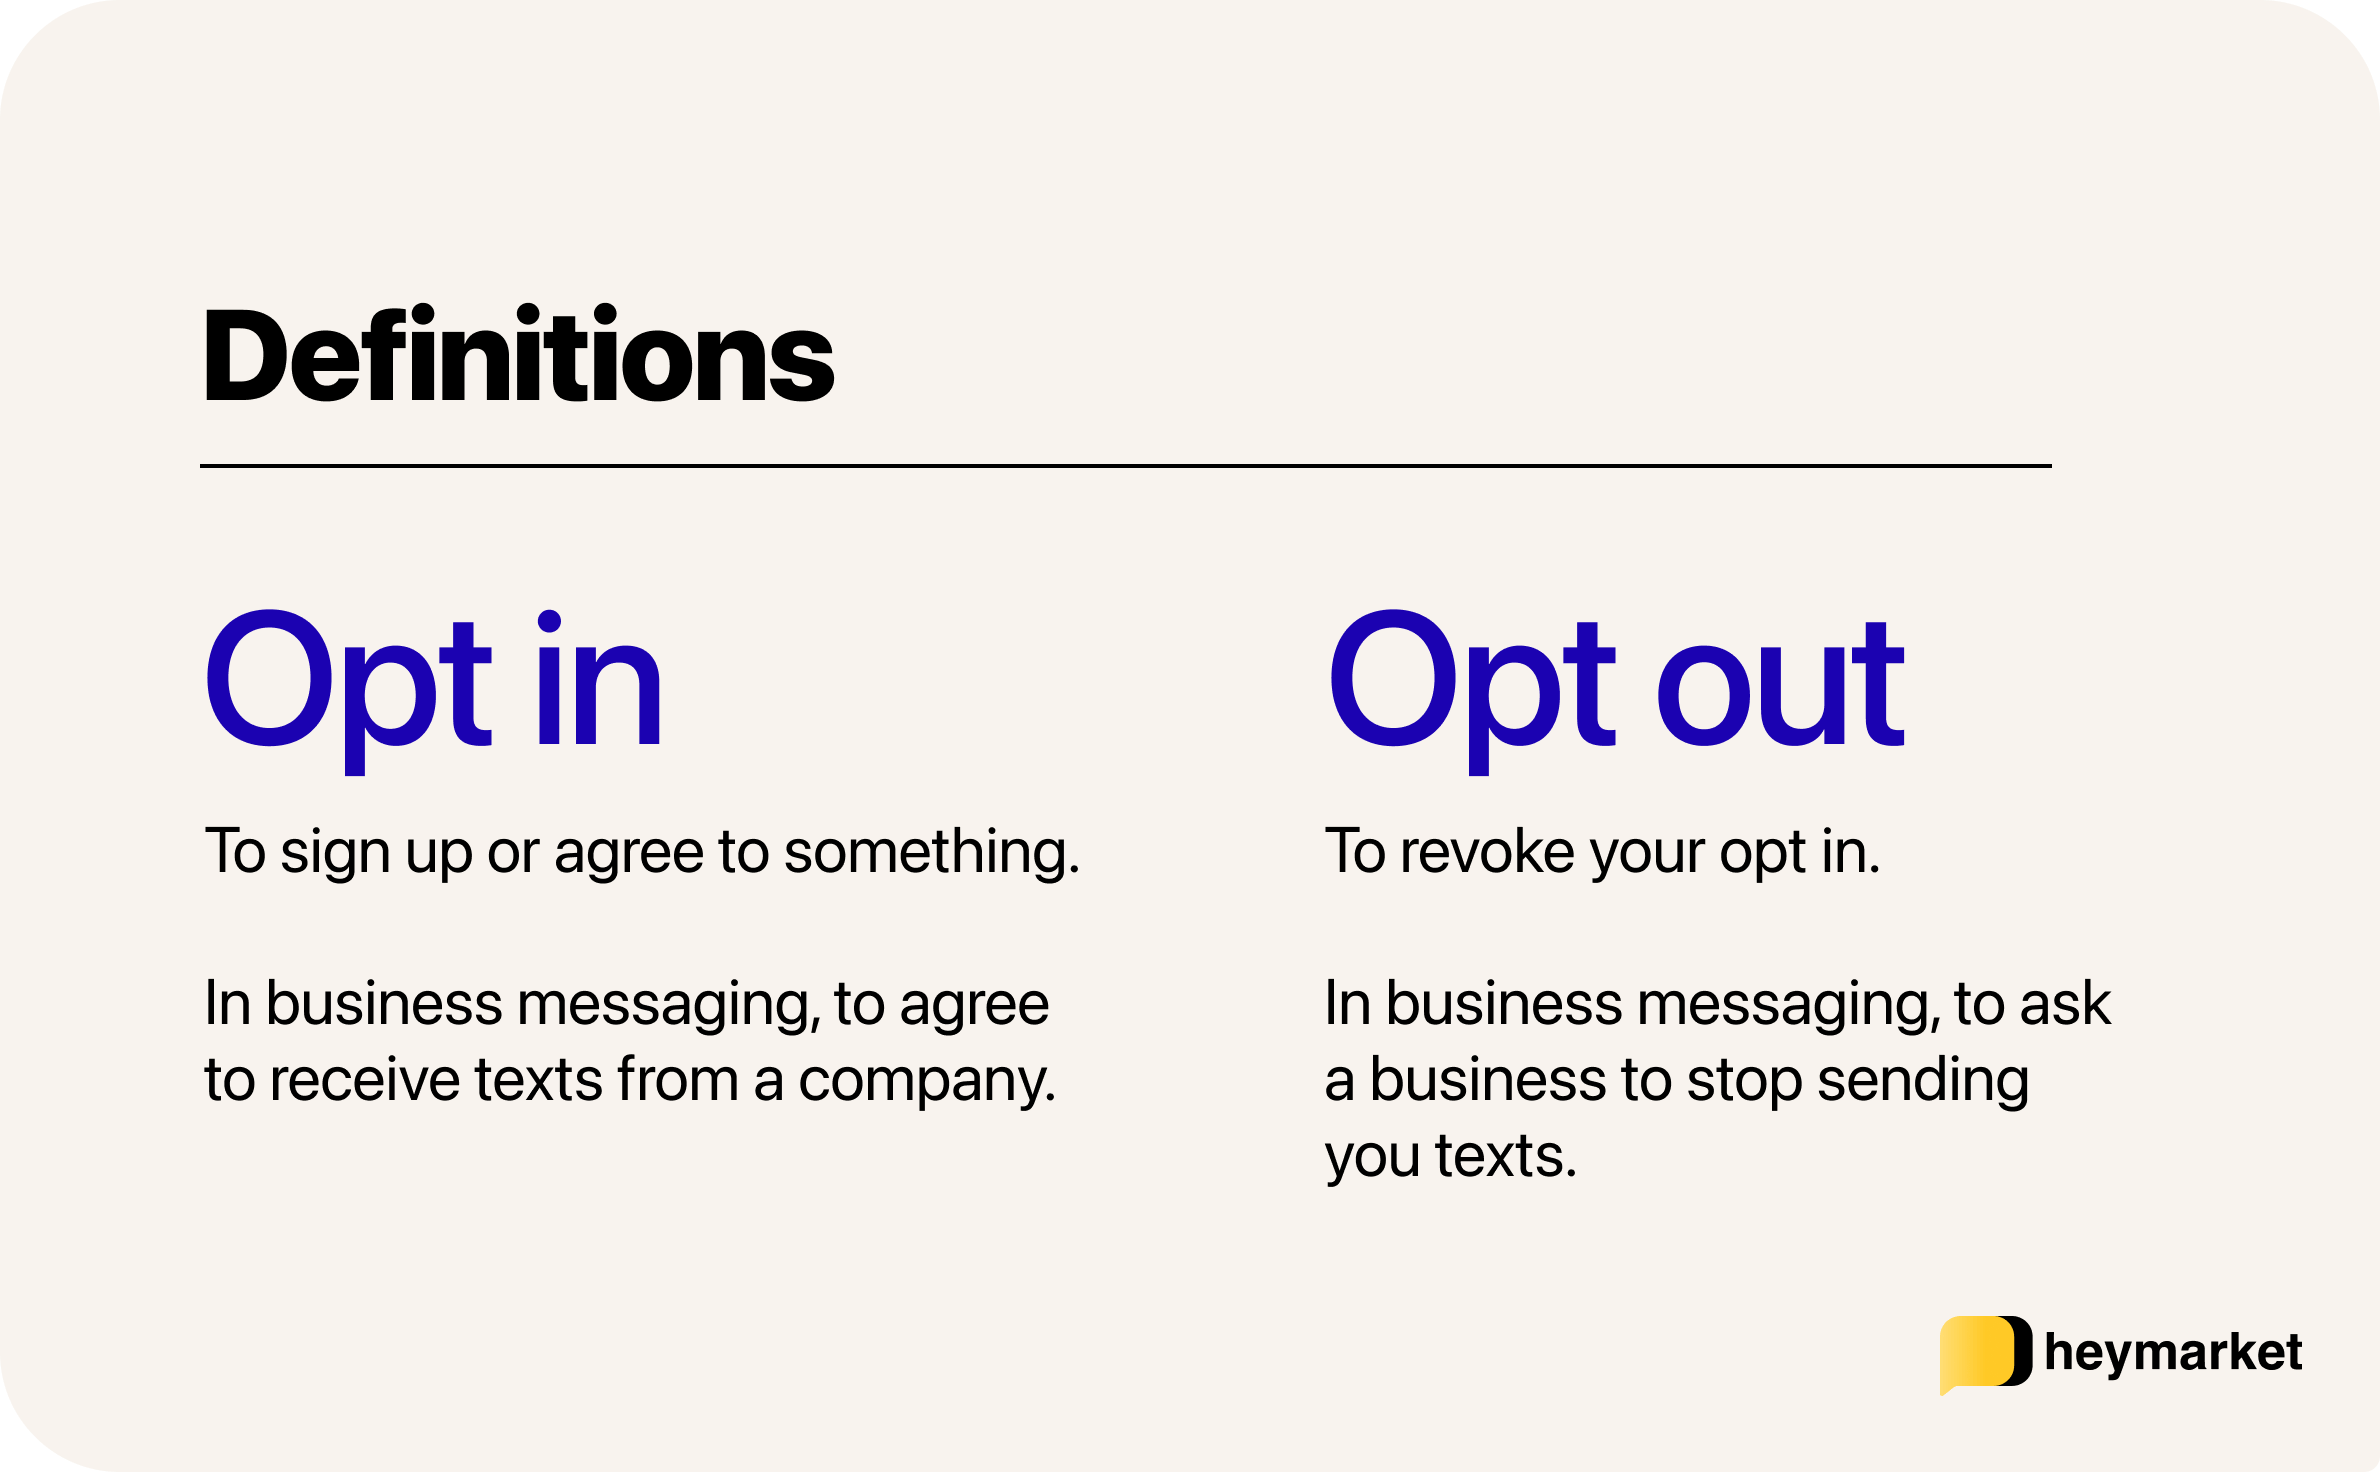 Illustration showing the meaning of opt in, and opt out in texting